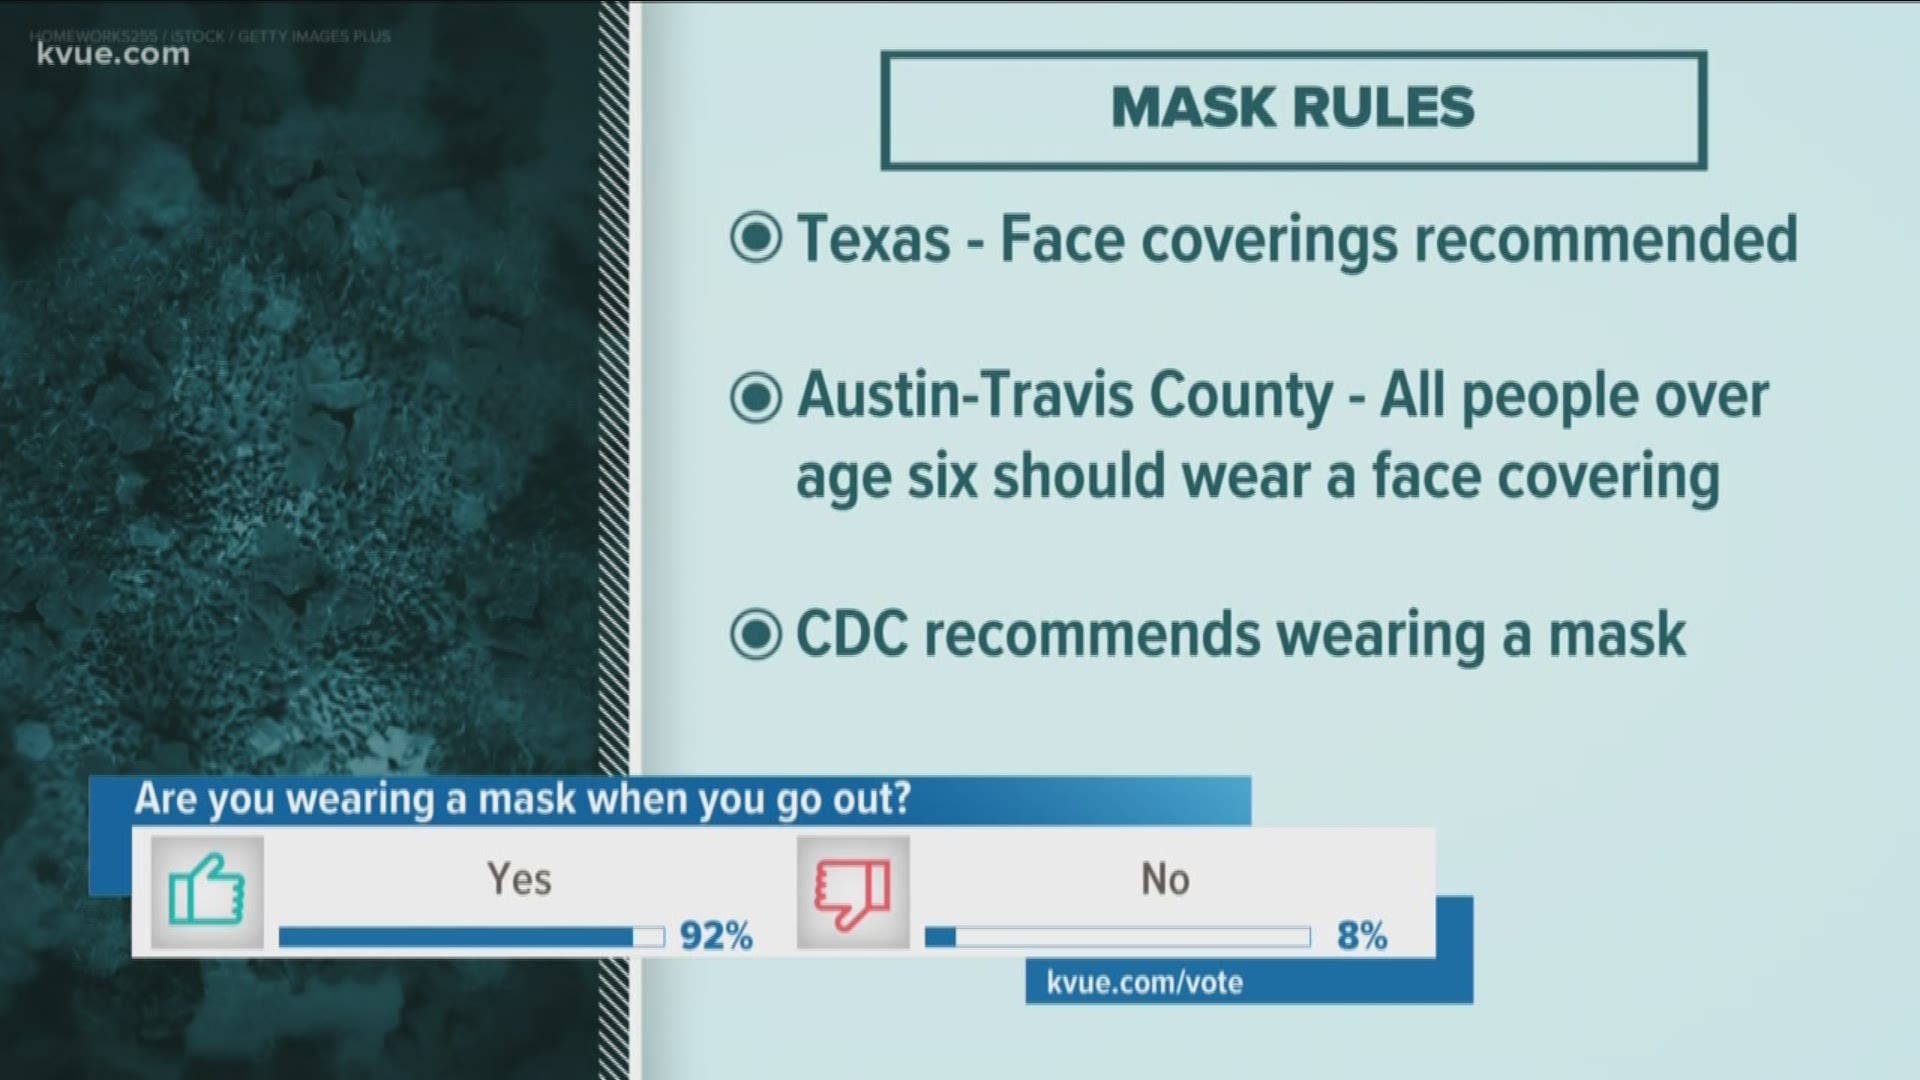 There's been some confusion about mask regulations, so we broke down the rules.